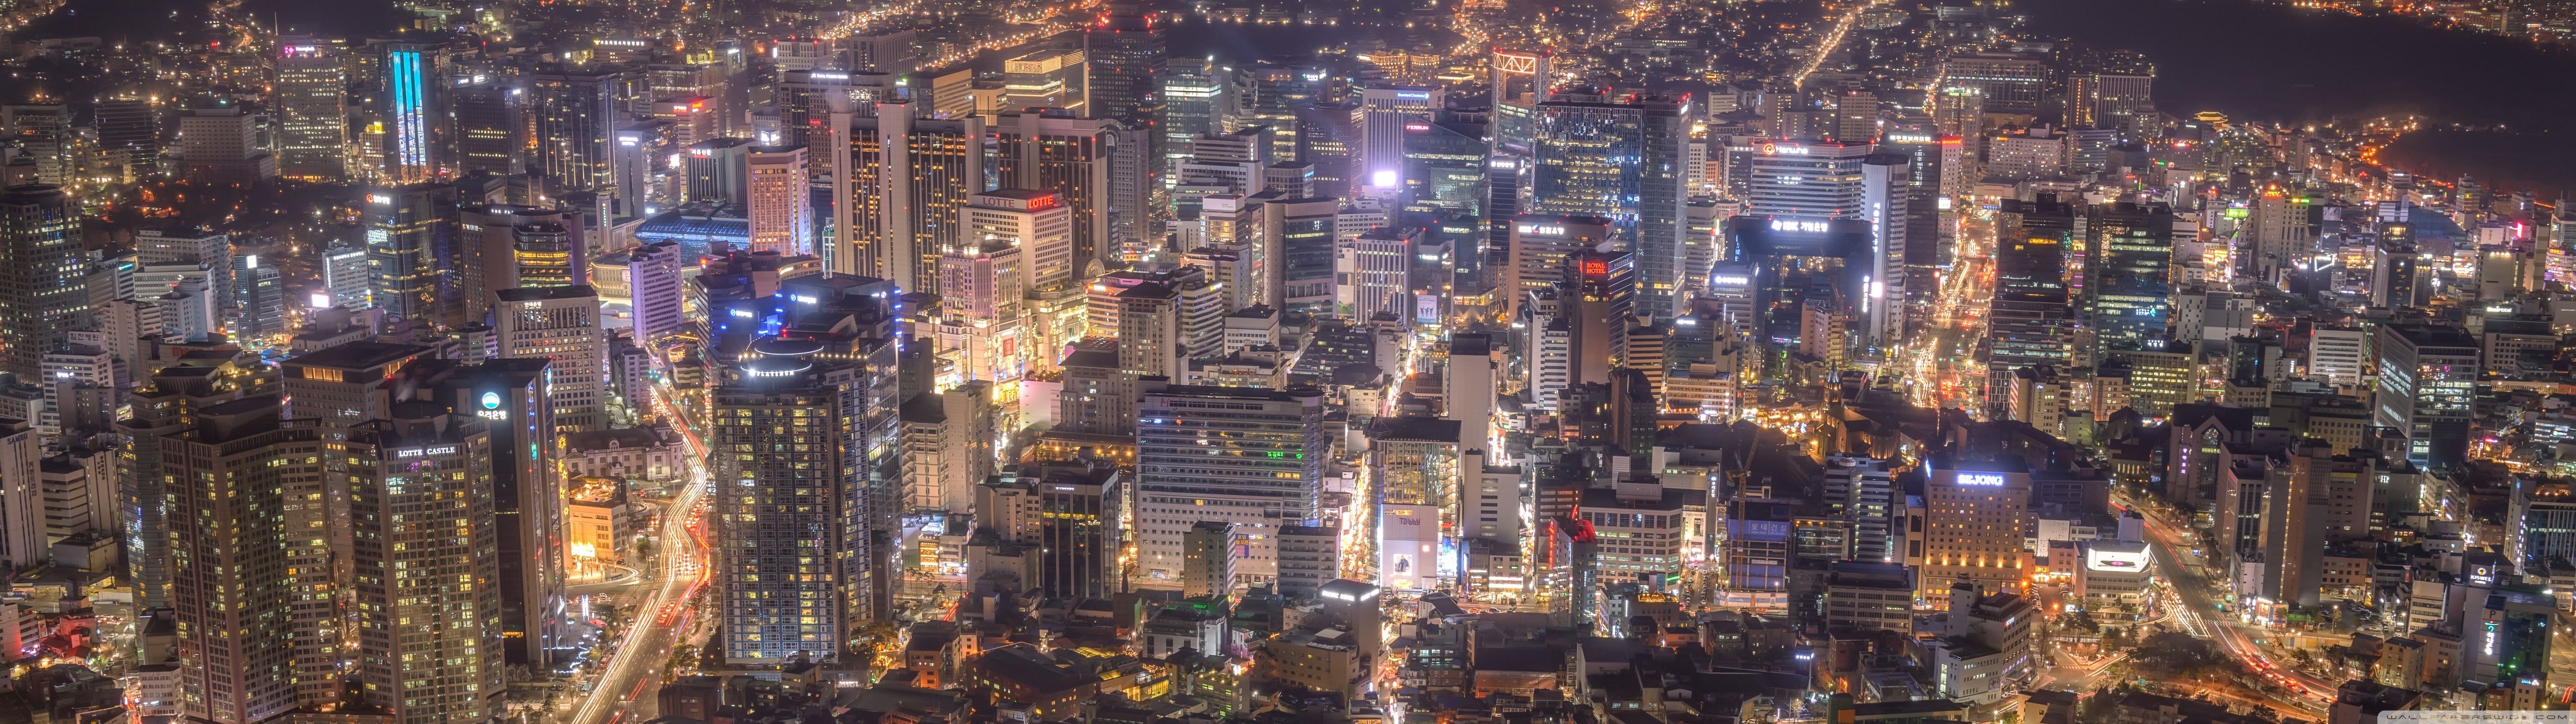 The 2015 Seoul Cityscape wallpaper 4K Ultra HD wallpaper for your desktop or mobile device - 5120x1440